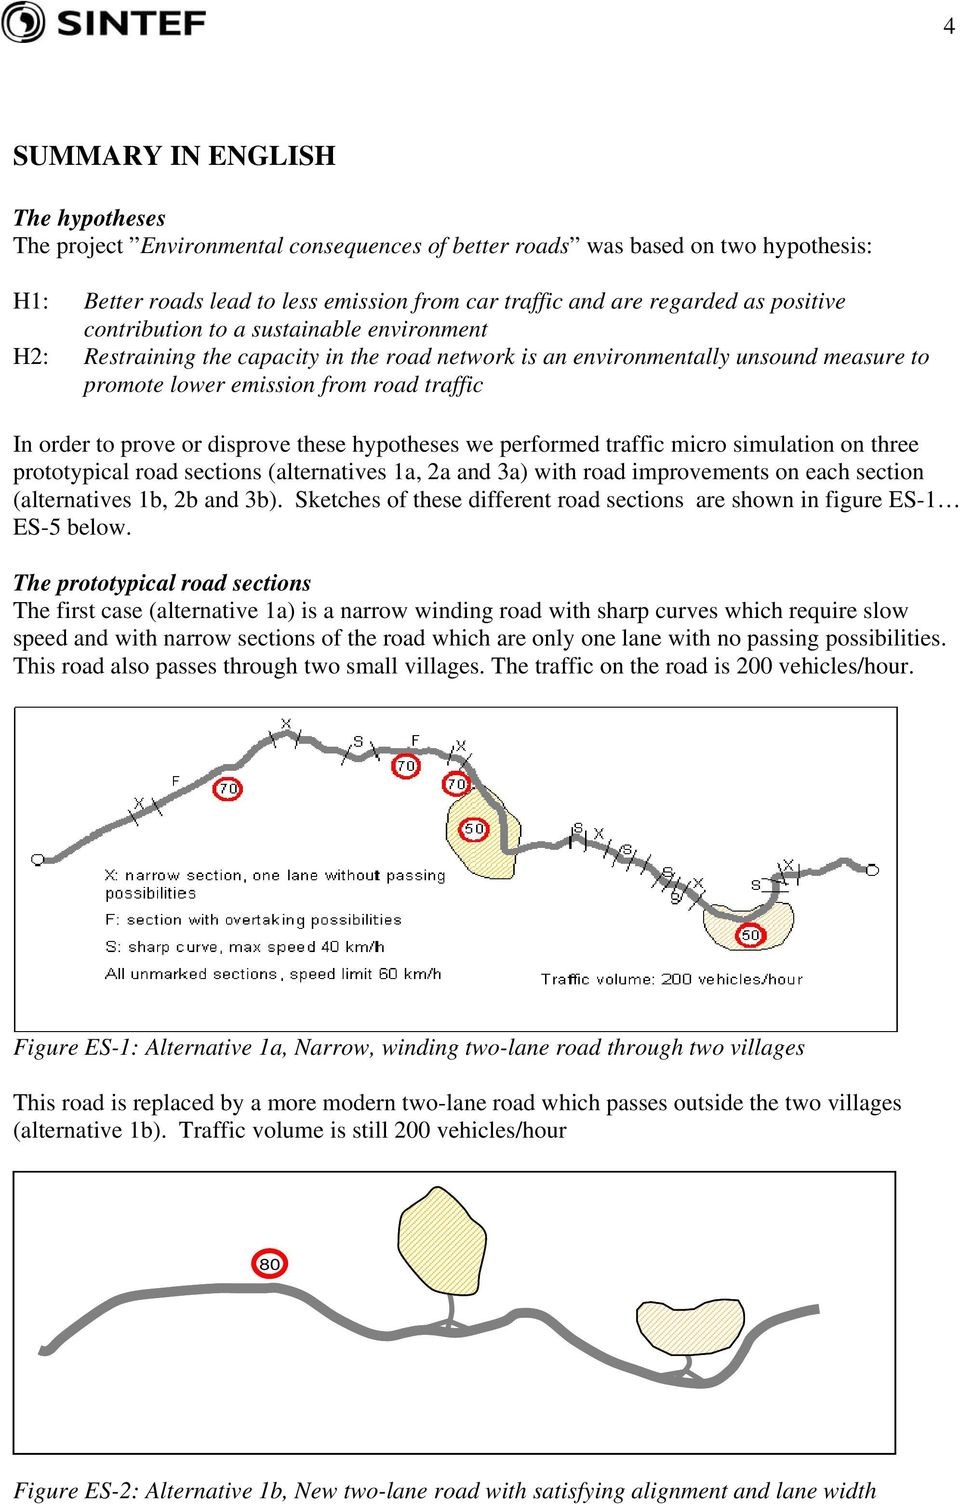 or disprove these hypotheses we performed traffic micro simulation on three prototypical road sections (alternatives 1a, 2a and 3a) with road improvements on each section (alternatives 1b, 2b and 3b).